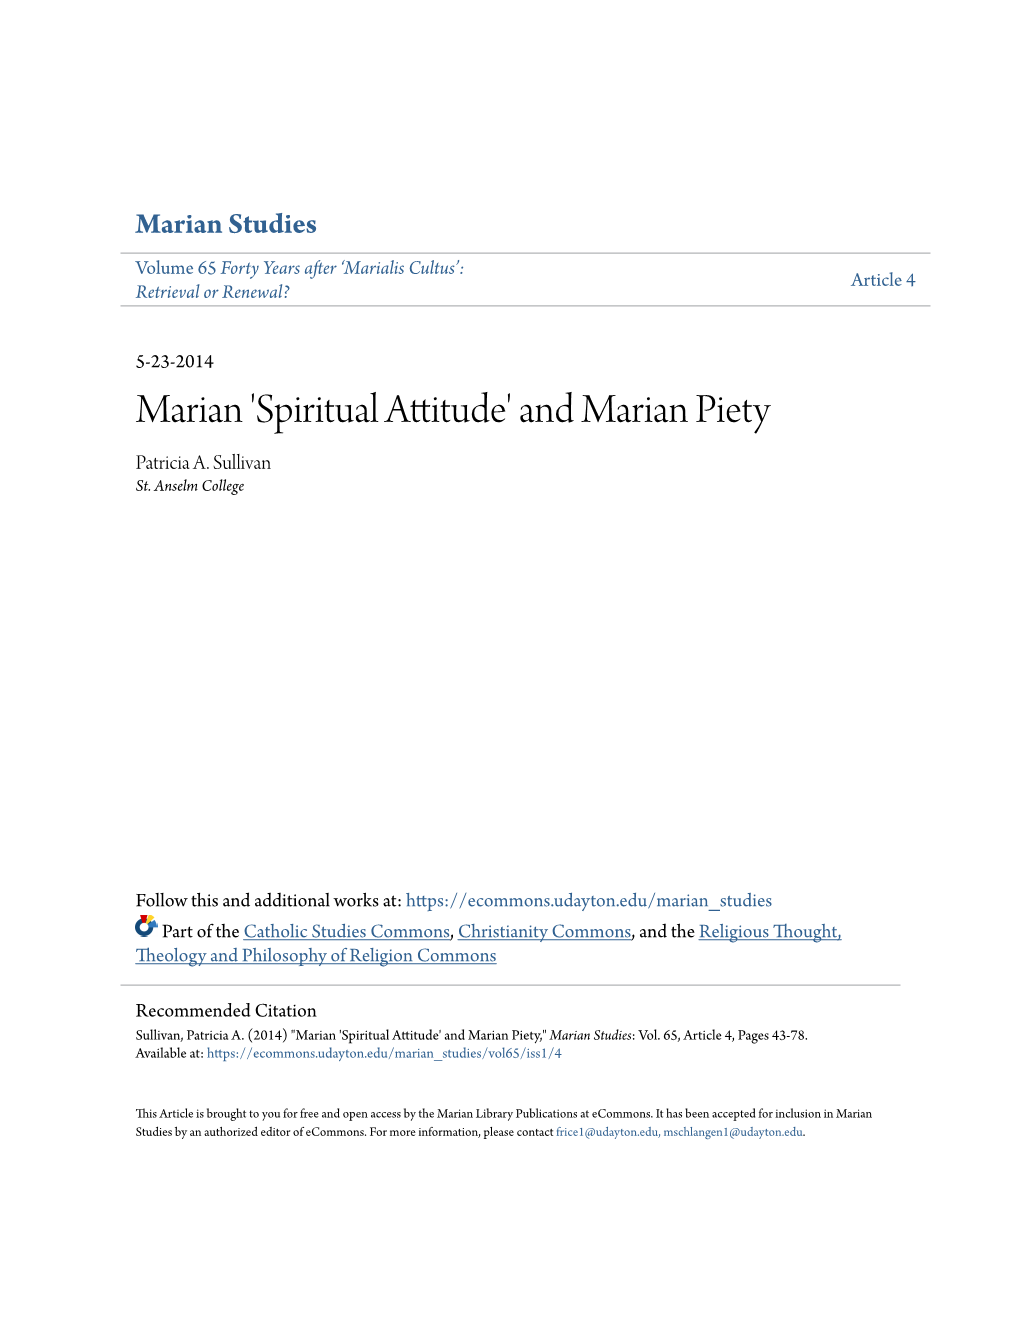 Marian Studies Volume 65 Forty Years After ‘Marialis Cultus’: Article 4 Retrieval Or Renewal?